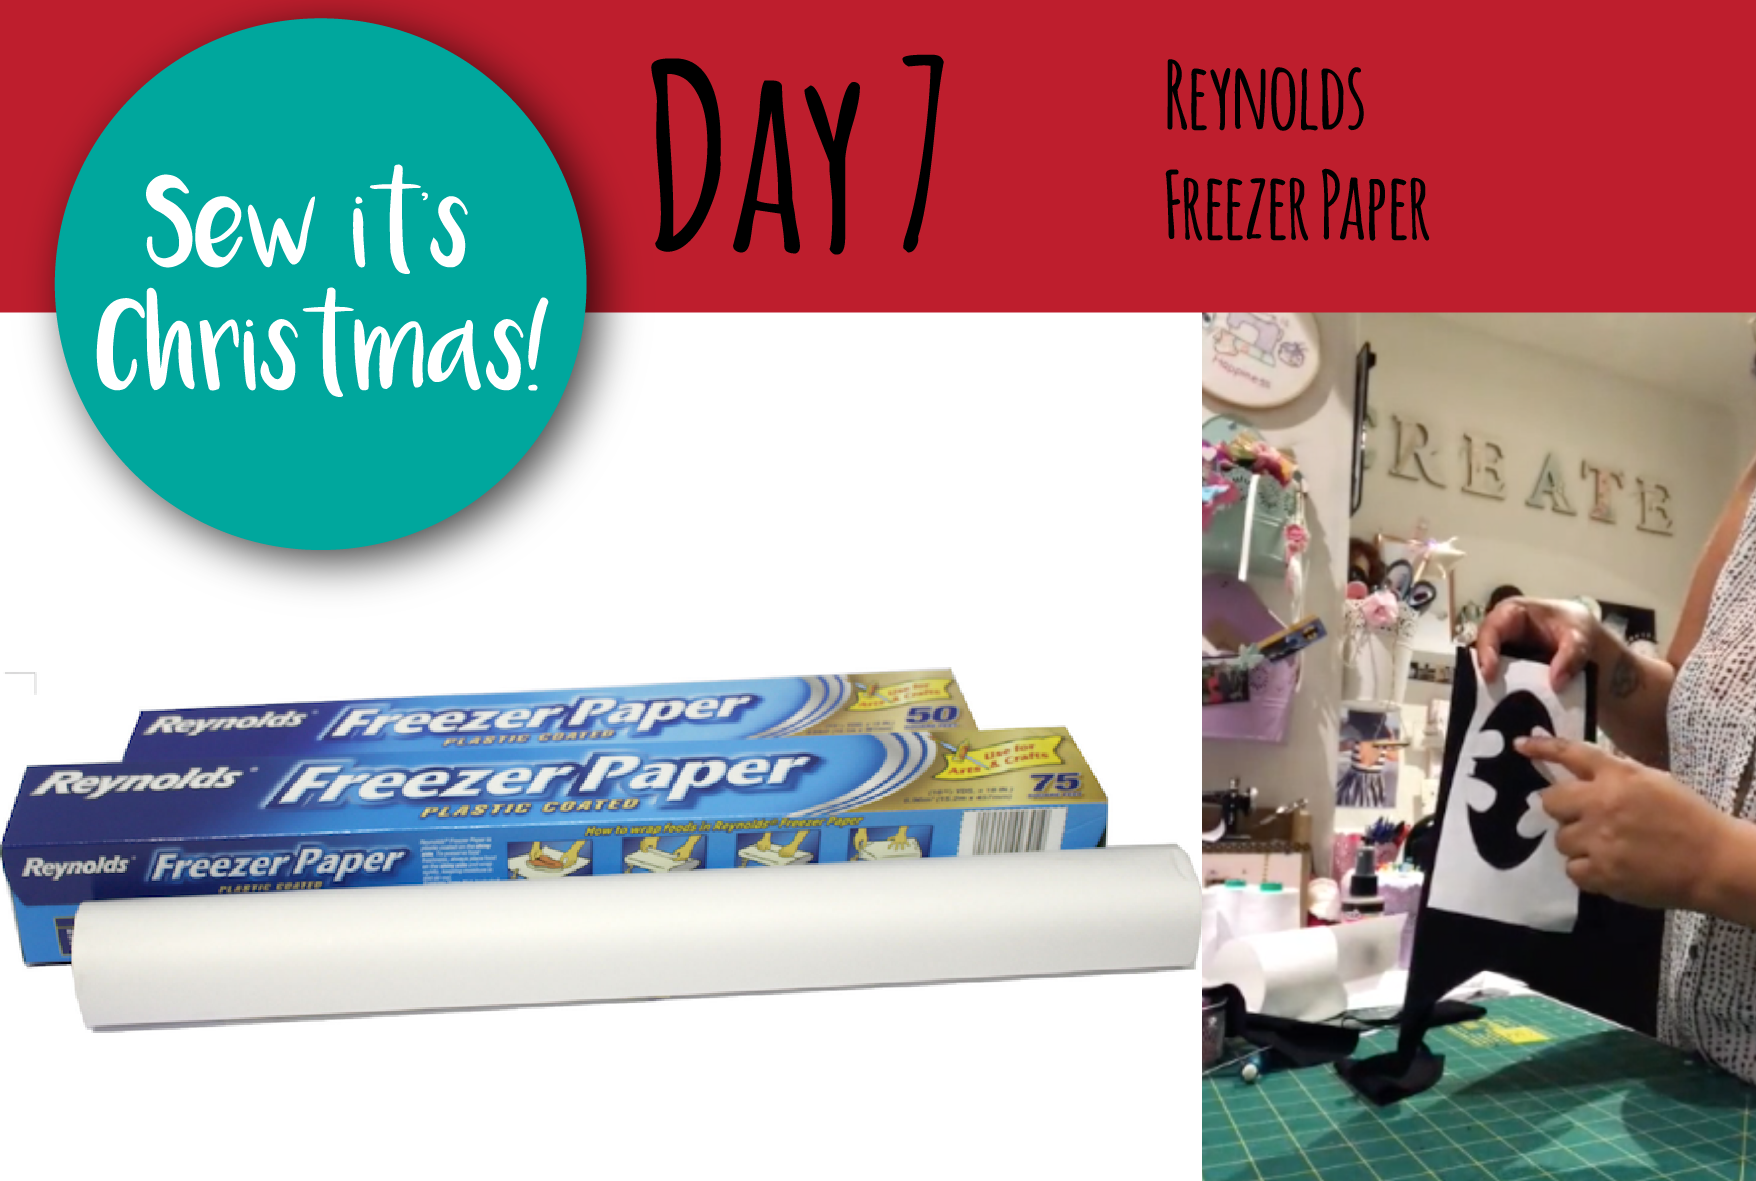 SEW IT'S CHRISTMAS - Day 7: Freezer Paper explained